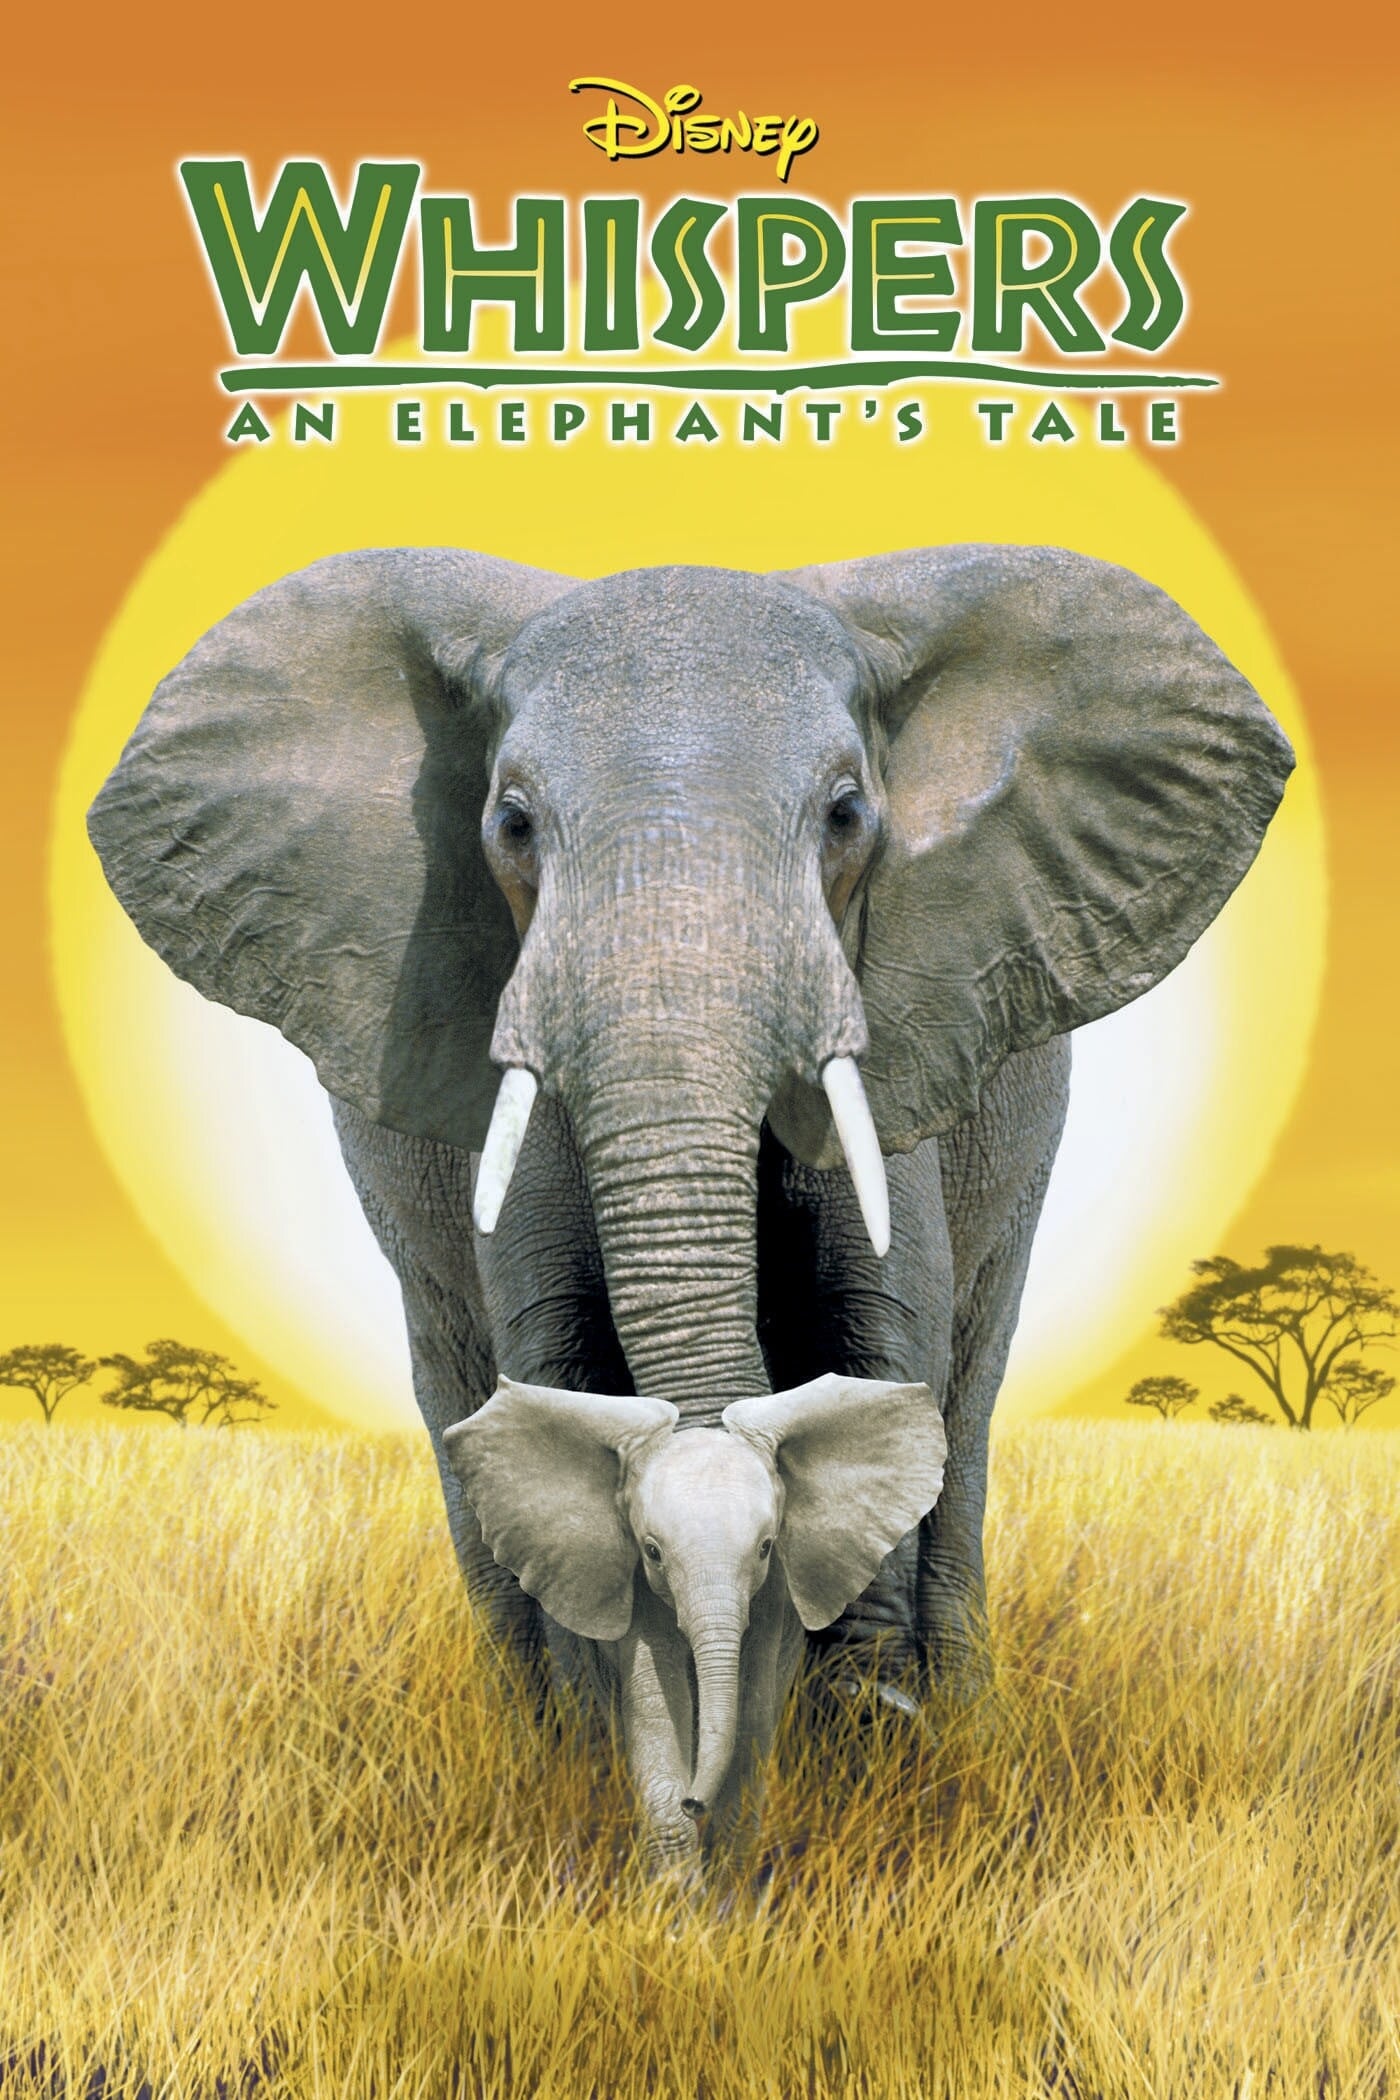 Whispers: An Elephant's Tale Trailer | Full Movie on 123Movies Free Online